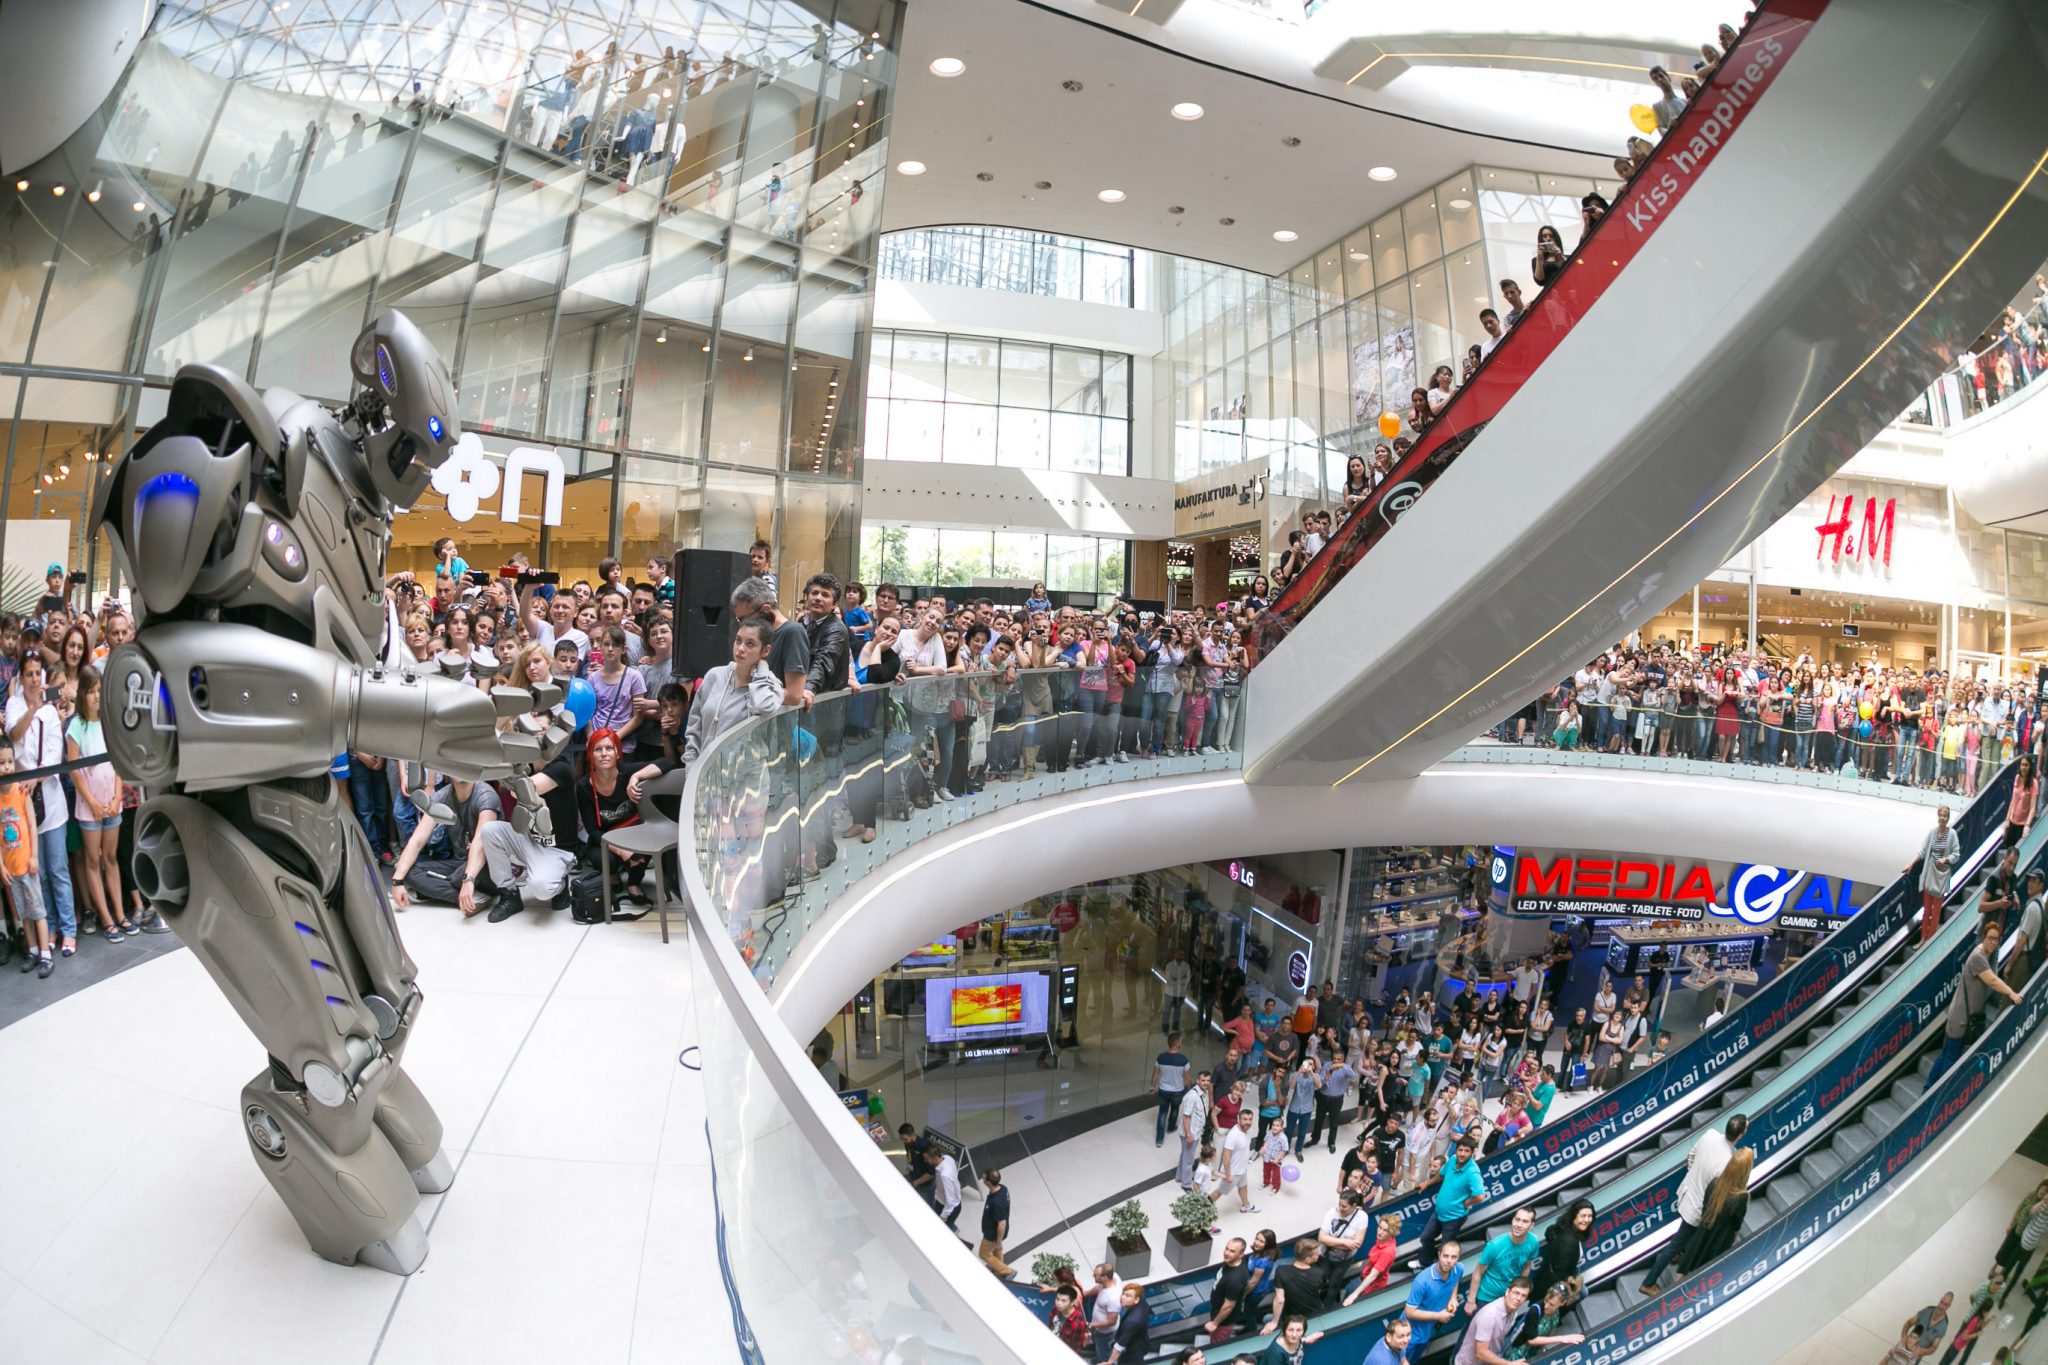 Titan the Robot drawing a crowd in the Megamall, Romania.